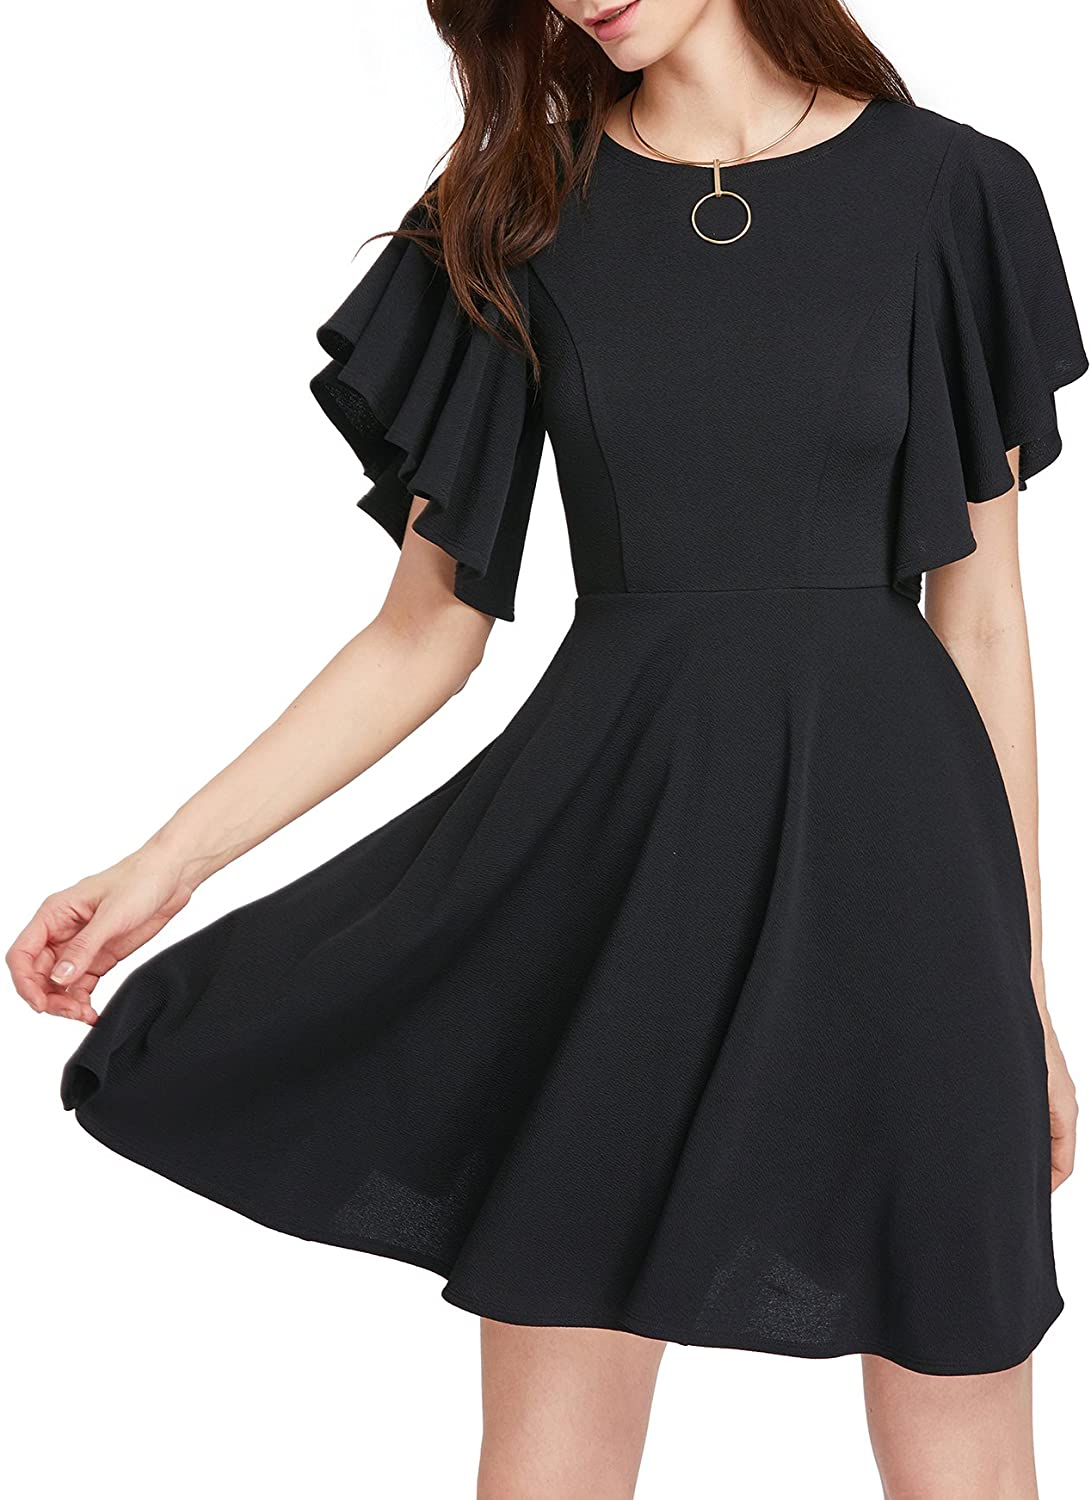 Haute Edition Women's Flared Skater Cocktail Party Dress Daily Haute